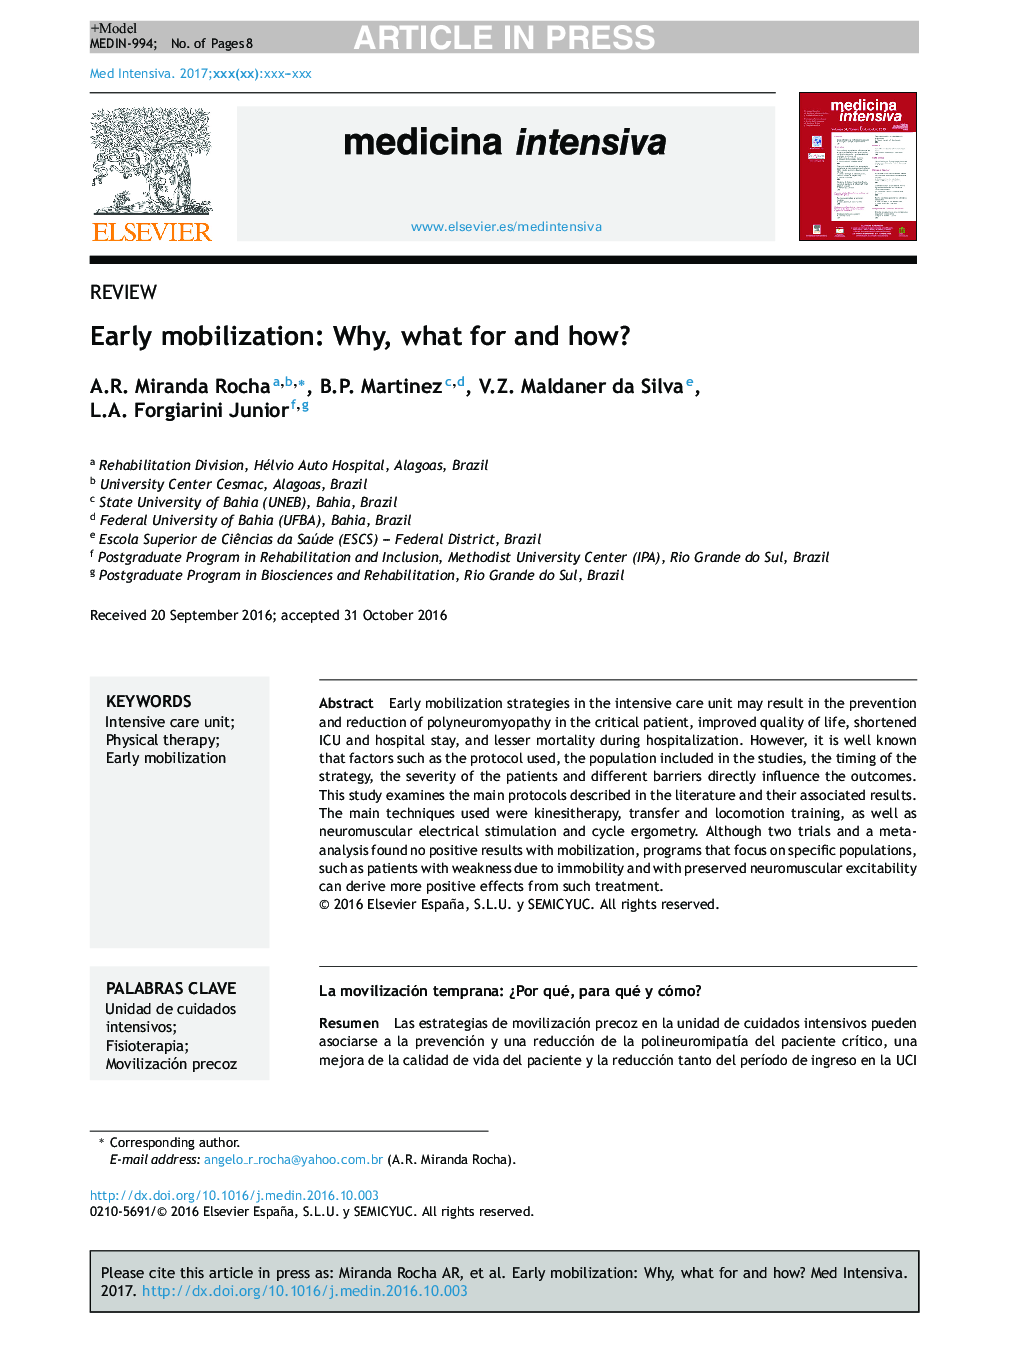 Early mobilization: Why, what for and how?